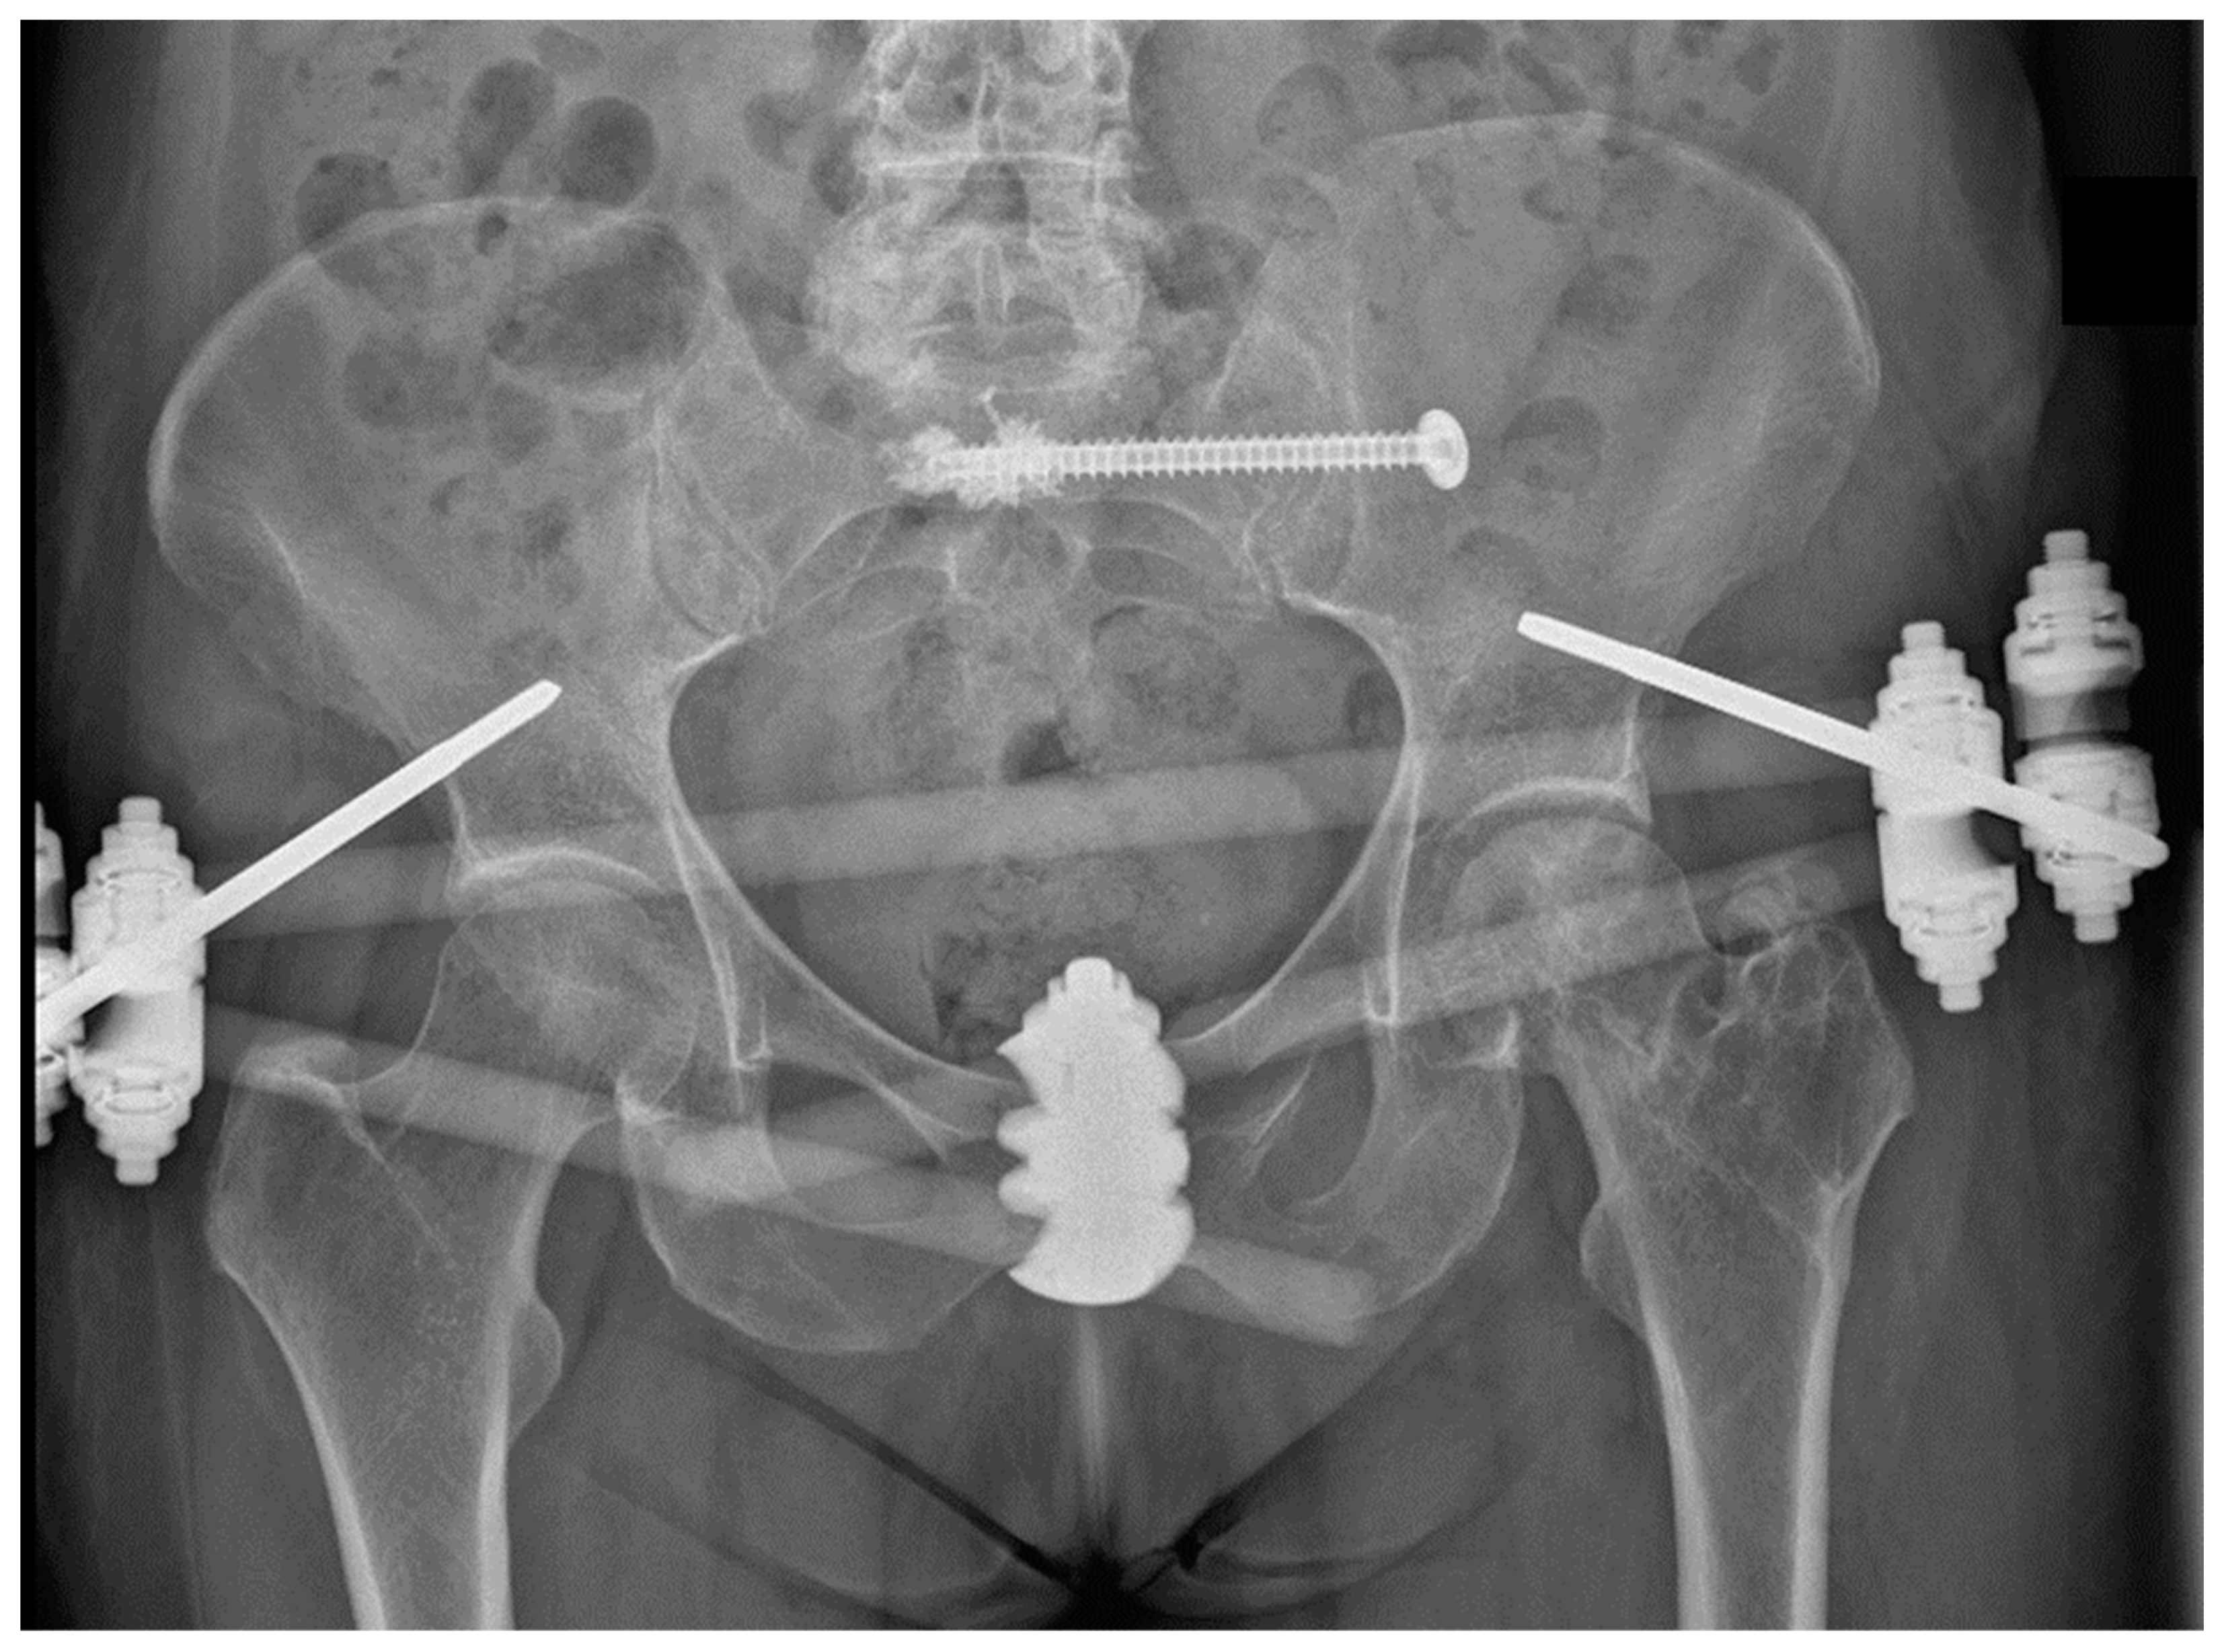 Major pelvic fractures. - Document - Gale Academic OneFile